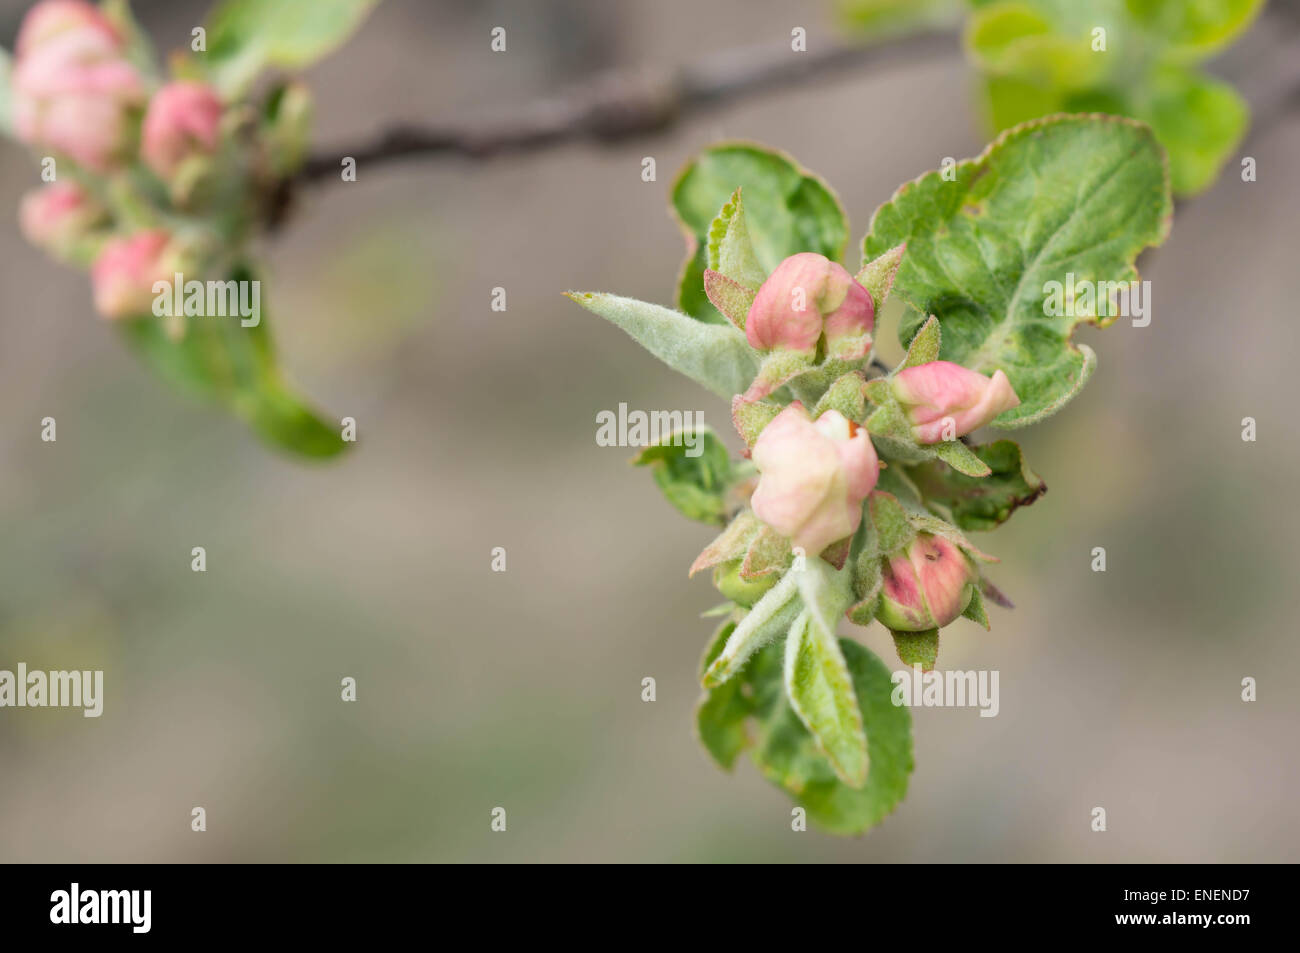 Buds of flowers and small leaves on an apple-tree Stock Photo